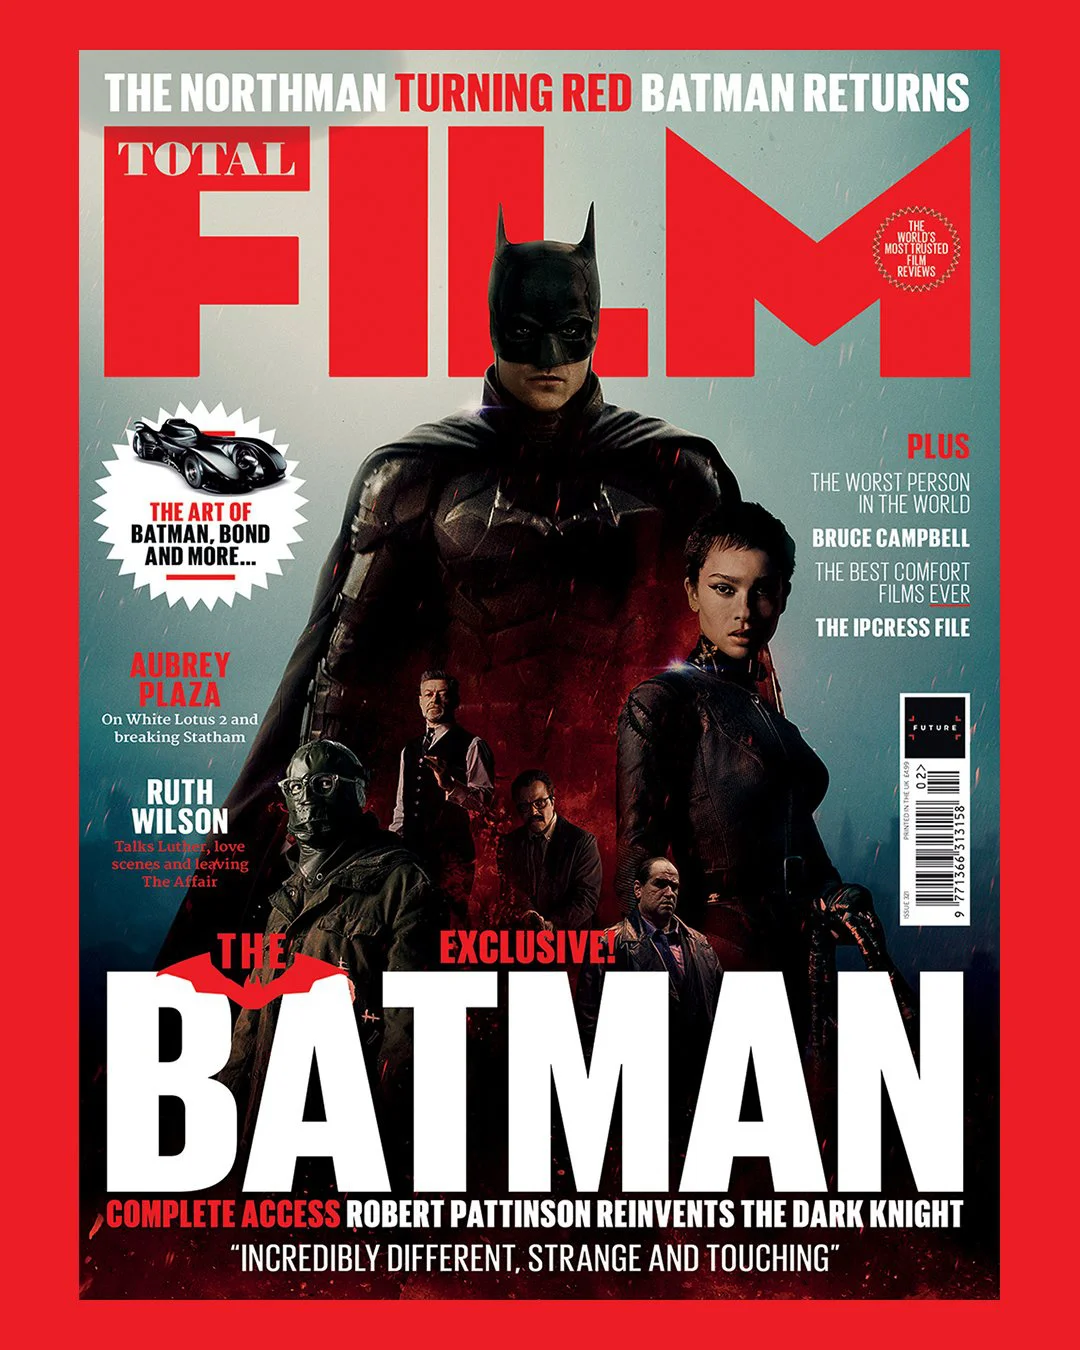 DC's "The Batman" on the cover of the magazine, the Riddler takes center stage